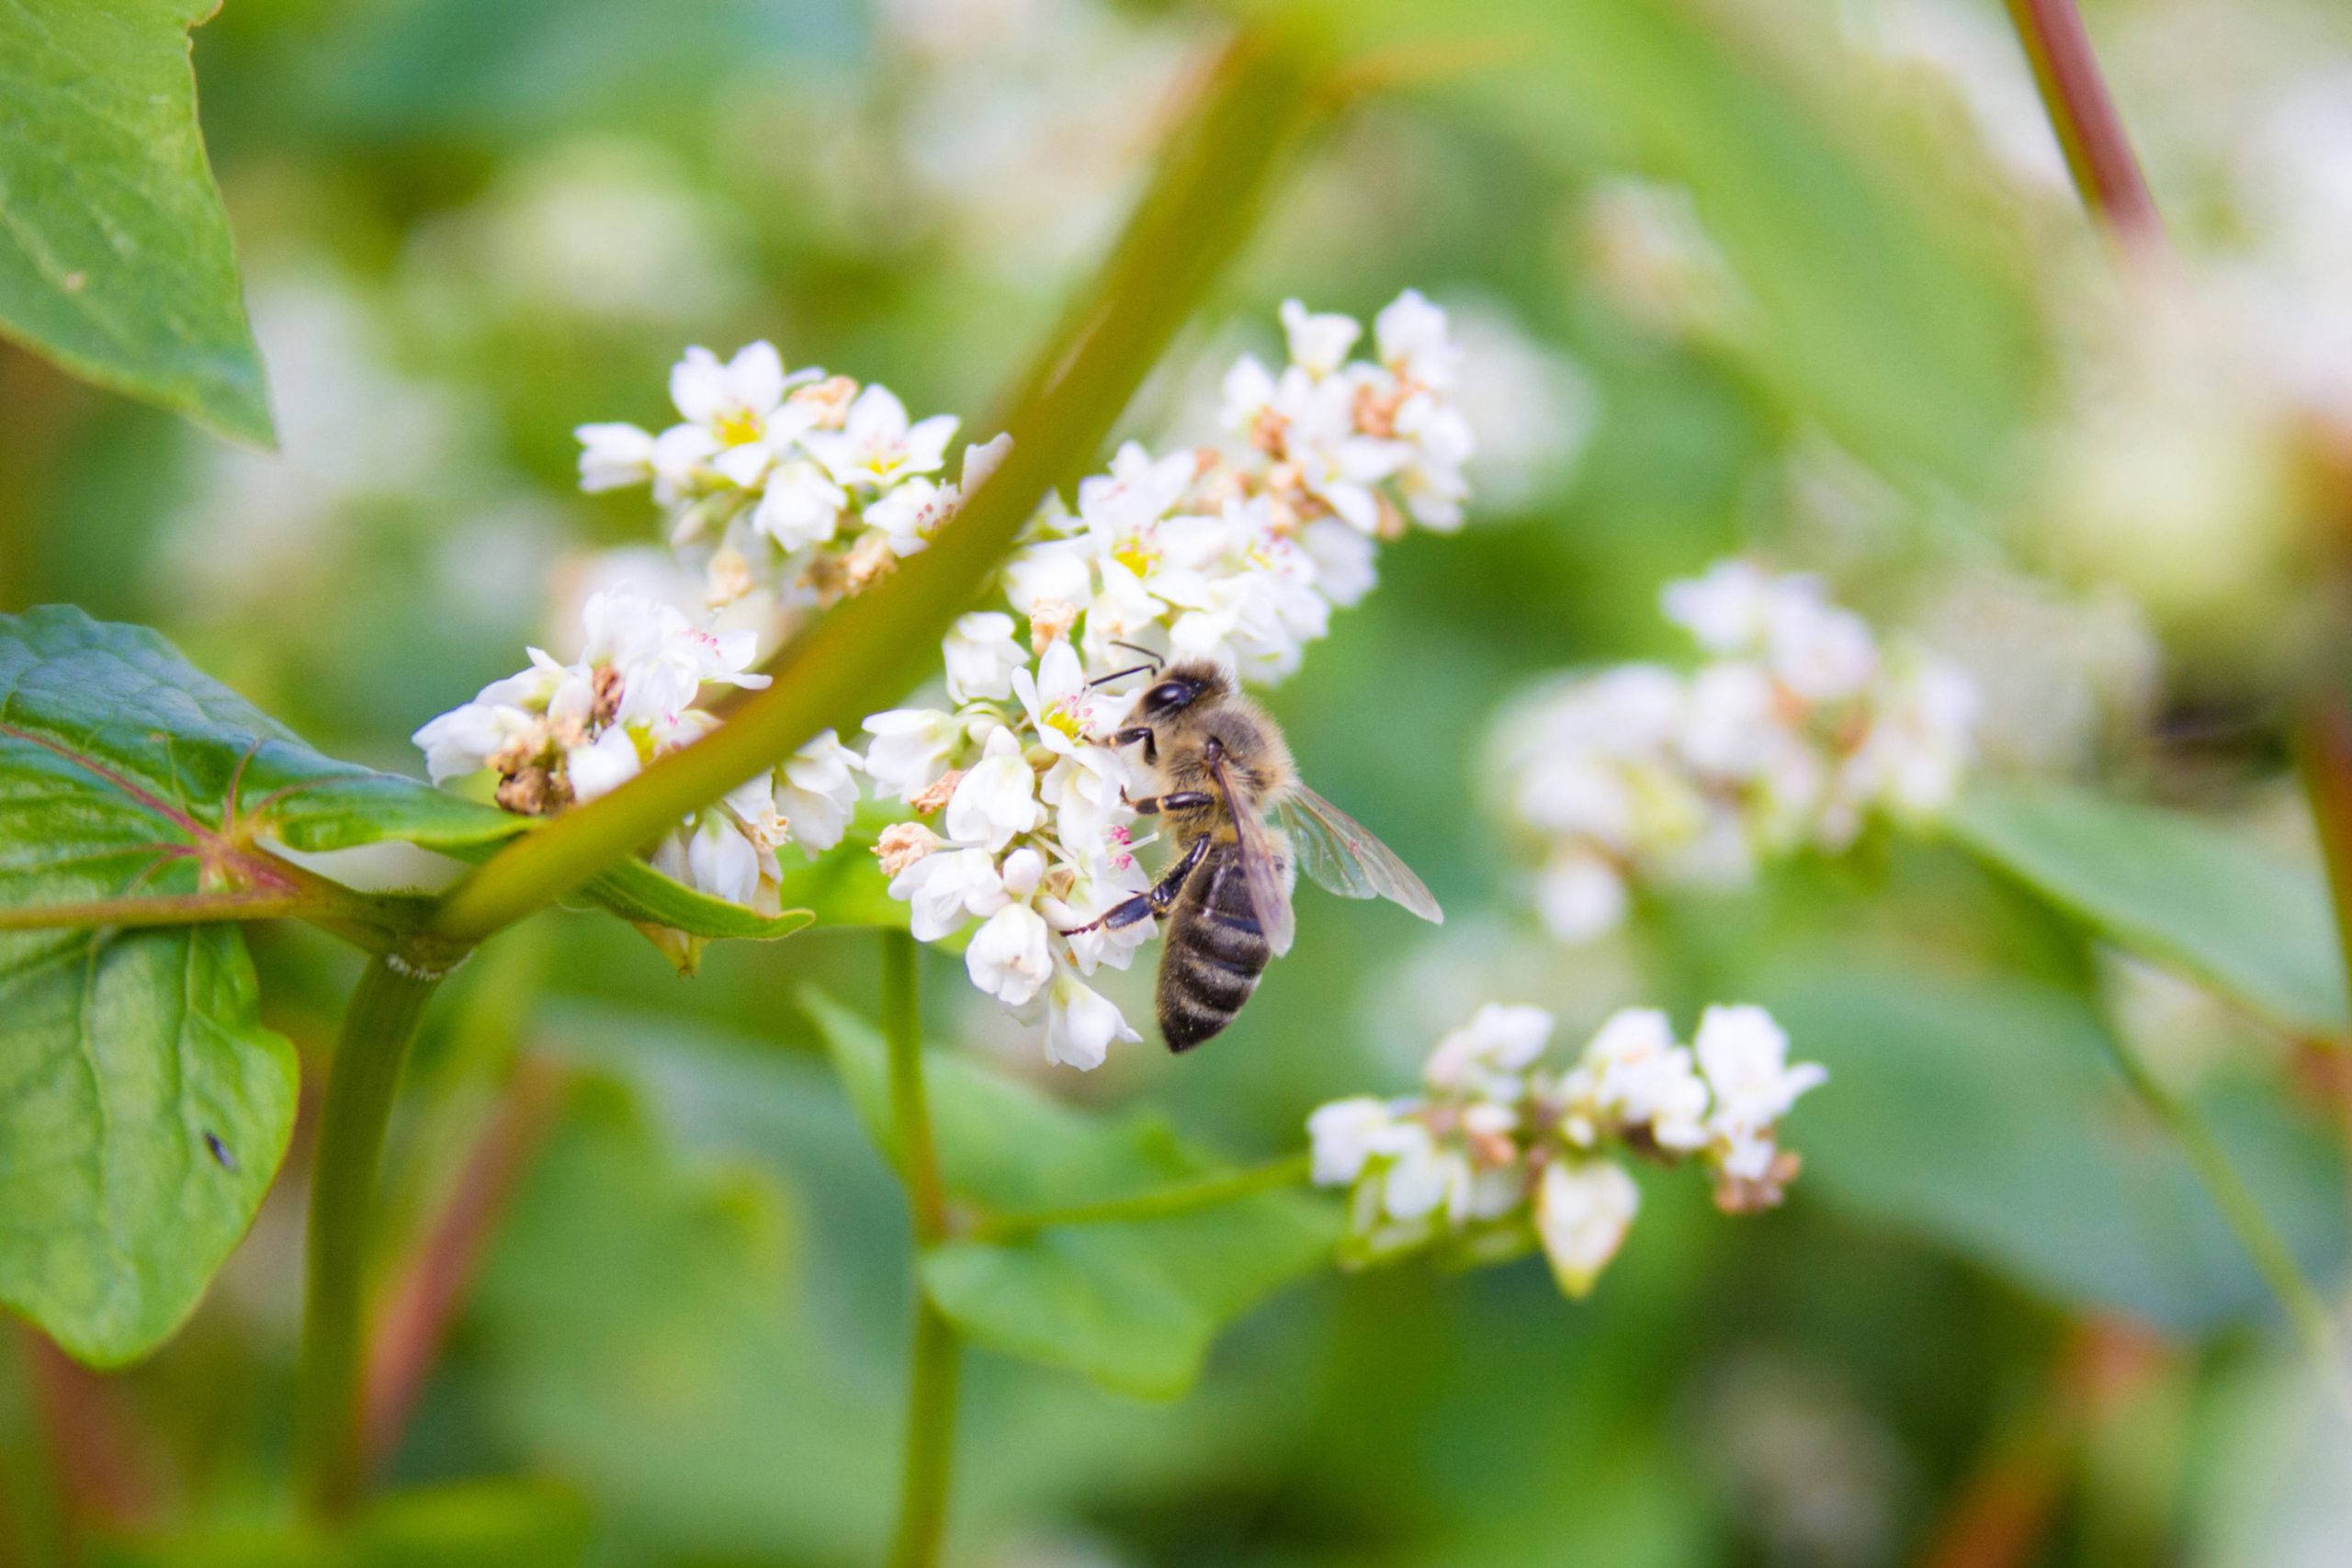 <p>Erratic rainfall in Bhutan has been detrimental to the flower blossoms from which the bees collect nectar [image by: Mateusz Atroszko/Alamy]</p>